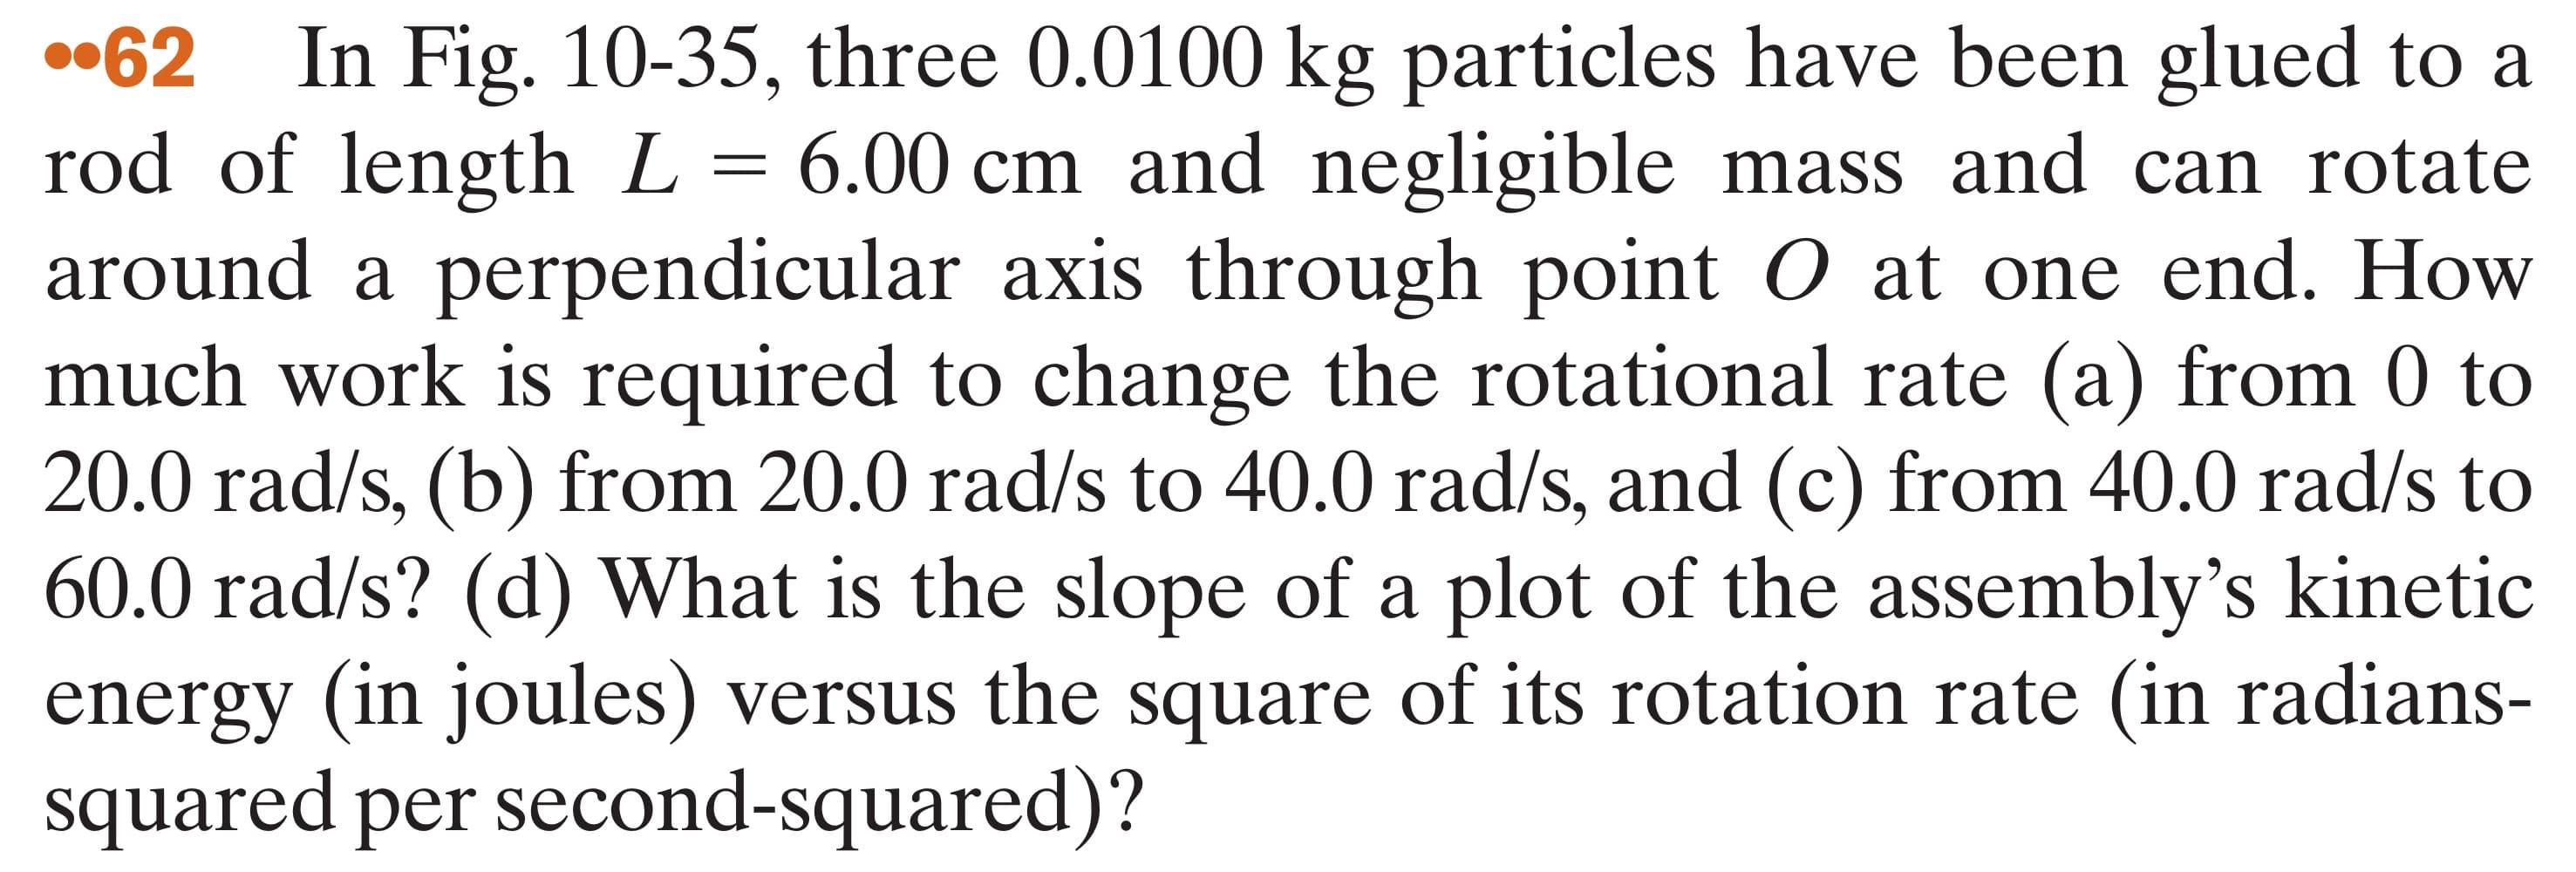 •62
In Fig. 10-35, three 0.0100 kg particles have been glued to a
rod of length L= 6.00 cm and negligible mass and can rotate
around a perpendicular axis through point O at one end. How
much work is required to change the rotational rate (a) from 0 to
20.0 rad/s, (b) from 20.0 rad/s to 40.0 rad/s, and (c) from 40.0 rad/s to
60.0 rad/s? (d) What is the slope of a plot of the assembly's kinetic
energy (in joules) versus the square of its rotation rate (in radians-
squared per second-squared)?
